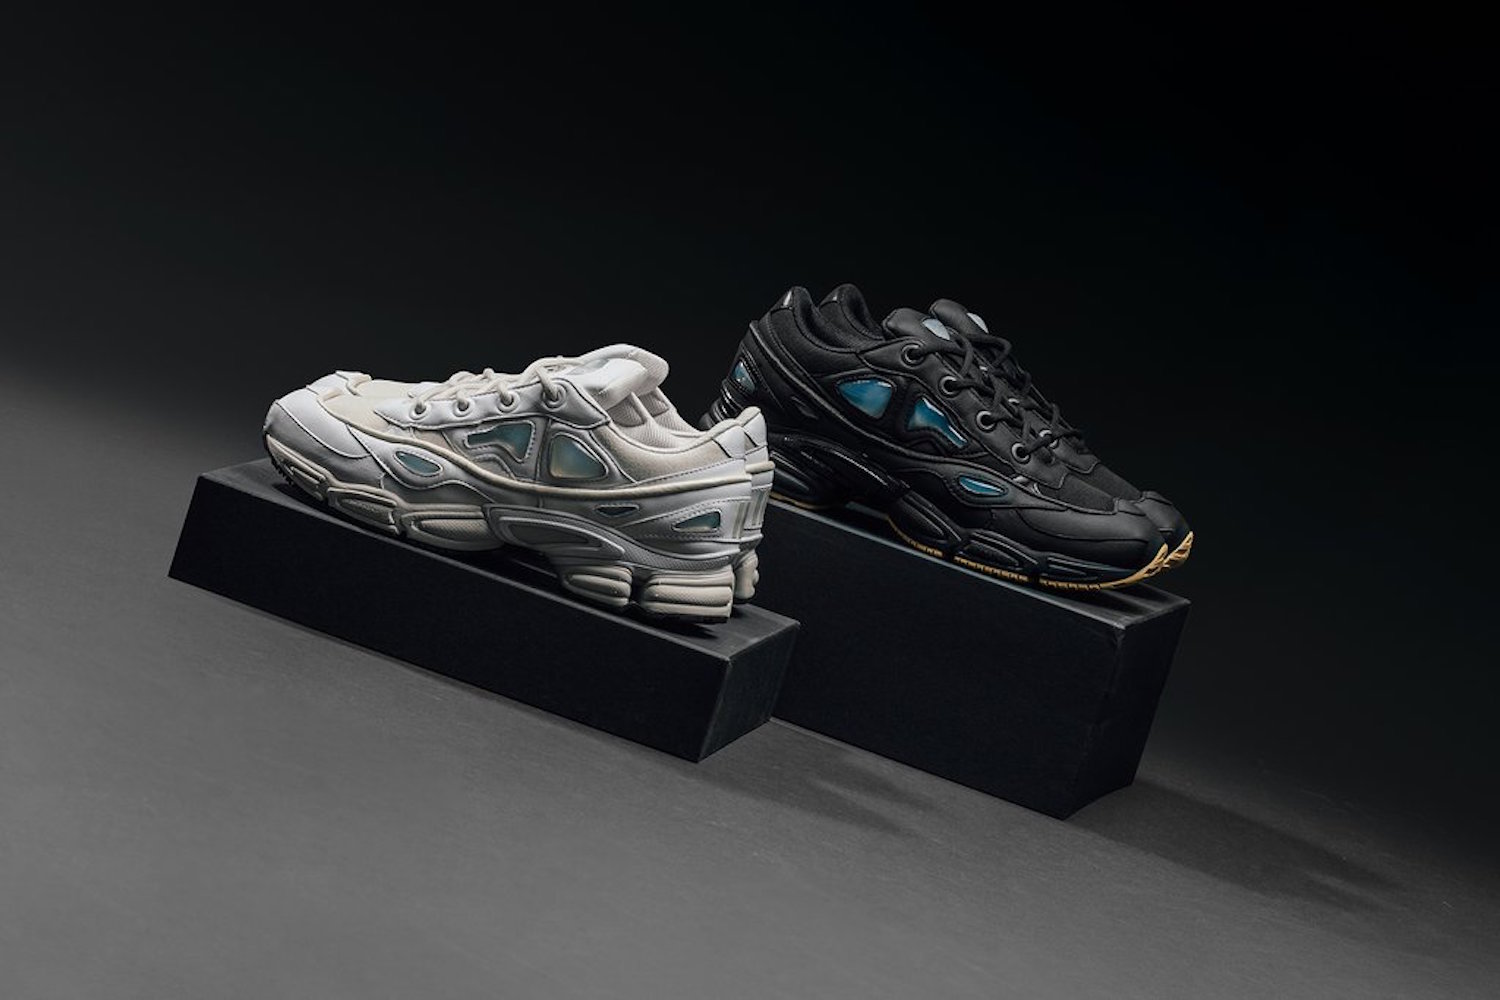 Adidas X Raf Simons Ozweego 3 Is Available Now - Trapped Magazine